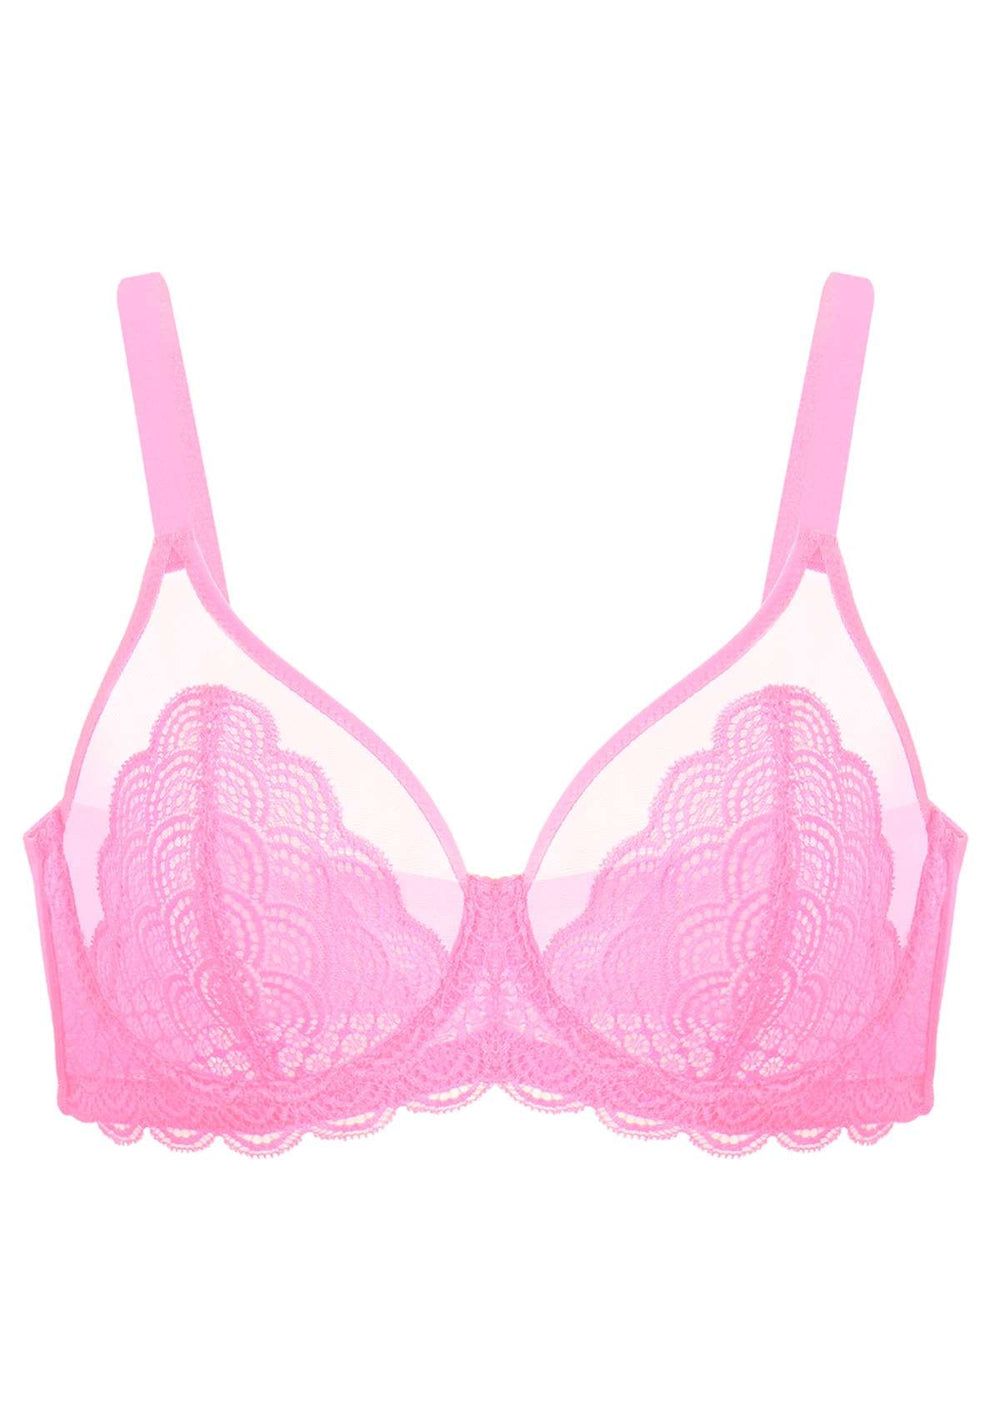 https://www.hsialife.com/cdn/shop/products/fbd0092mpi34c-hsia-hsia-scallop-lace-pink-unlined-bra-pink-34-c-38845407101177.jpg?v=1699439529&width=1000